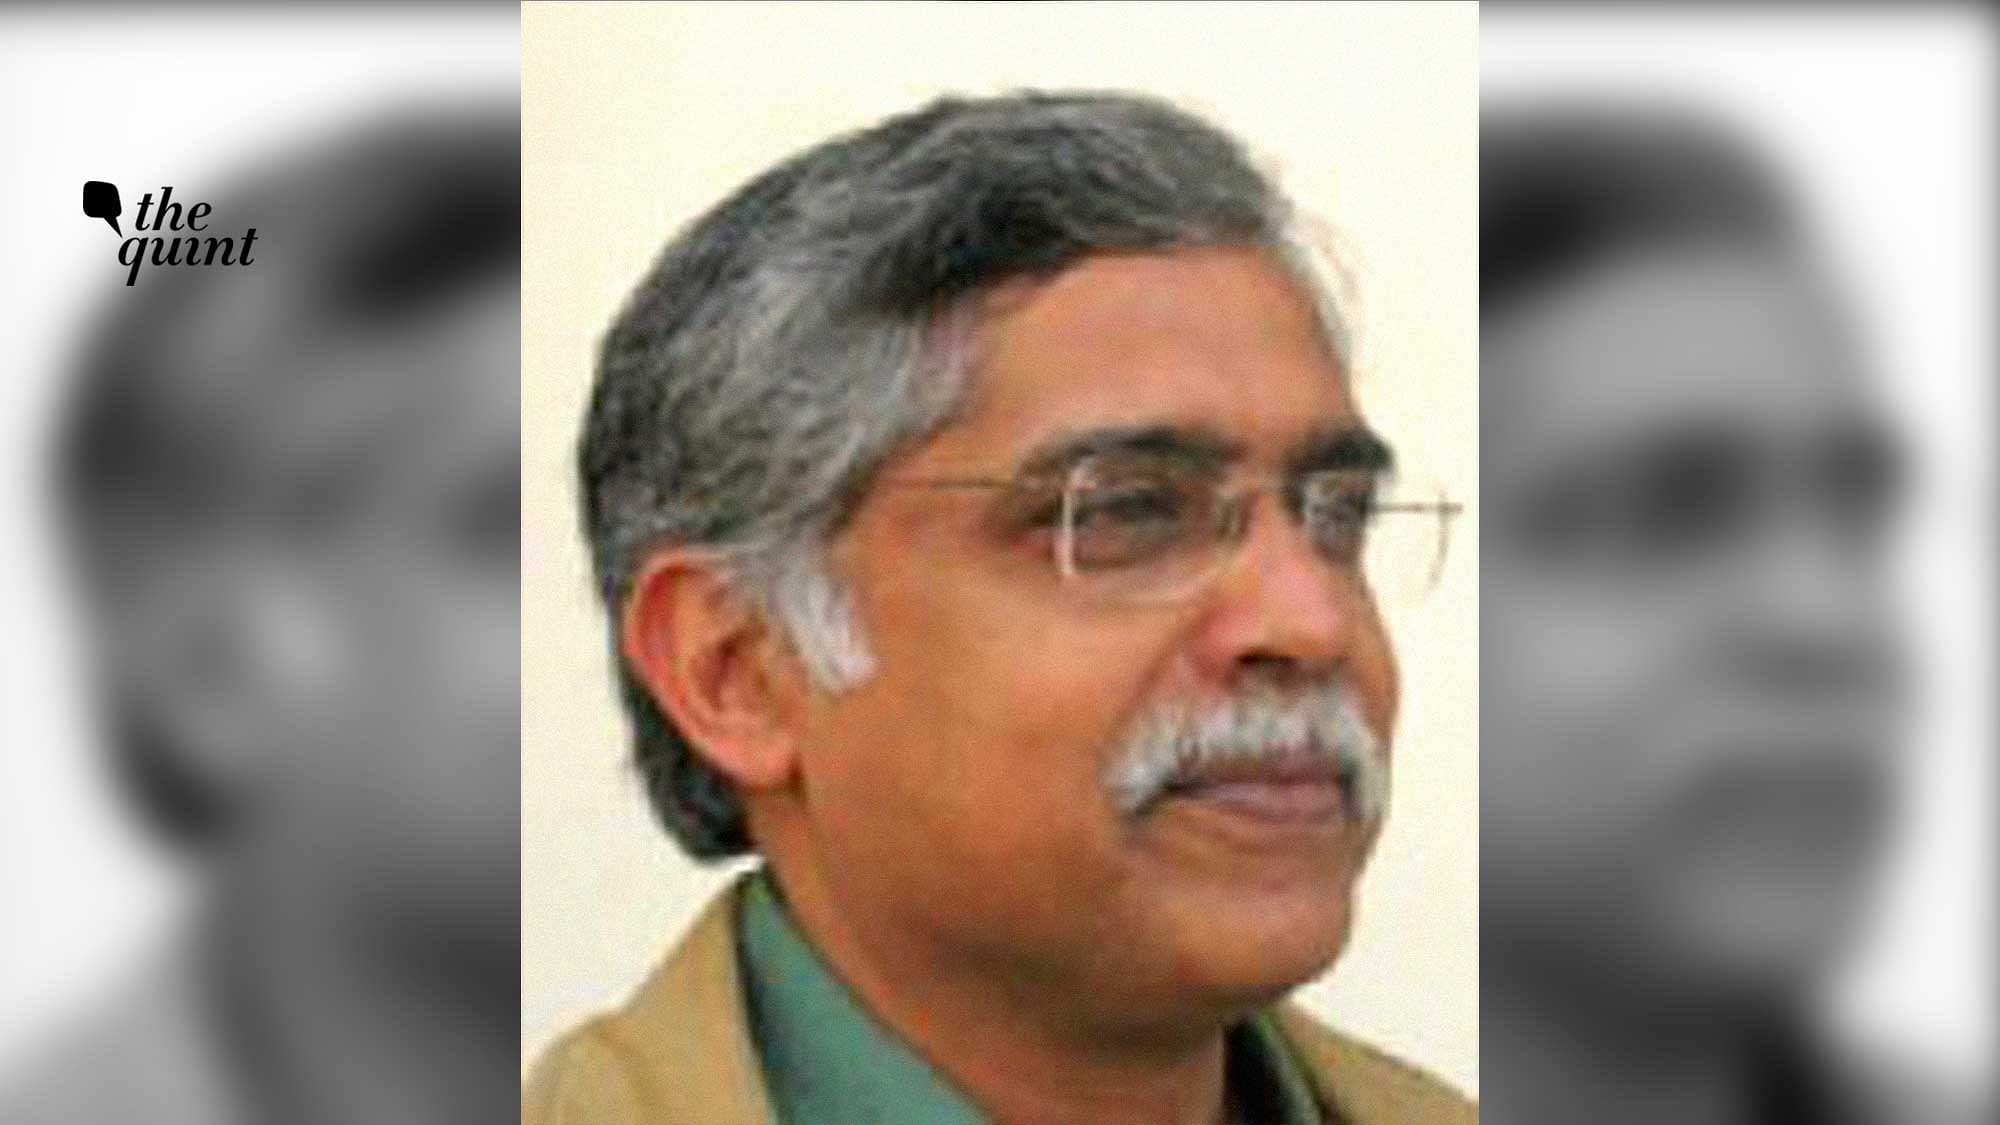 CP Chandrasekhar withdrew from the Standing Committee on Economic Statistics on Monday, a day after JNU violence.